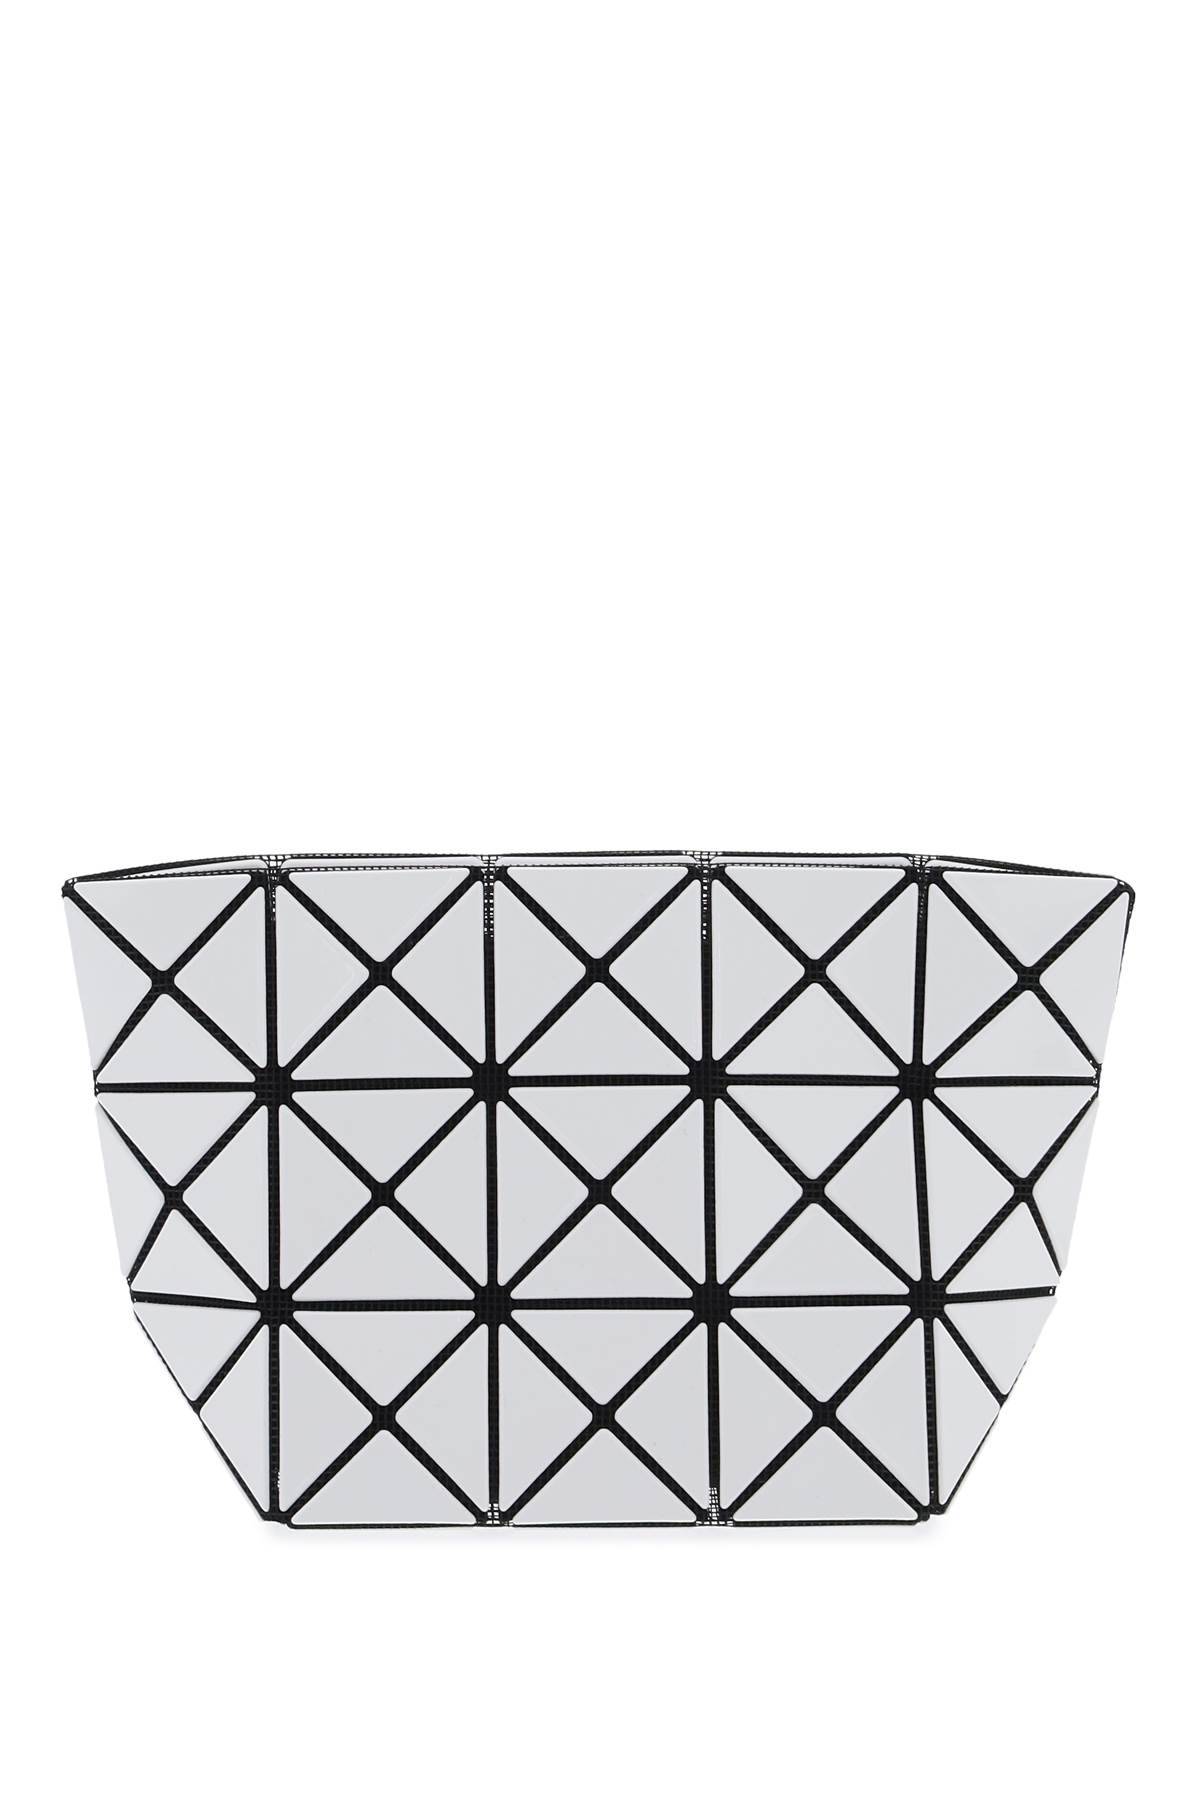 BAO BAO ISSEY MIYAKE BAO BAO ISSEY MIYAKE prism pouch